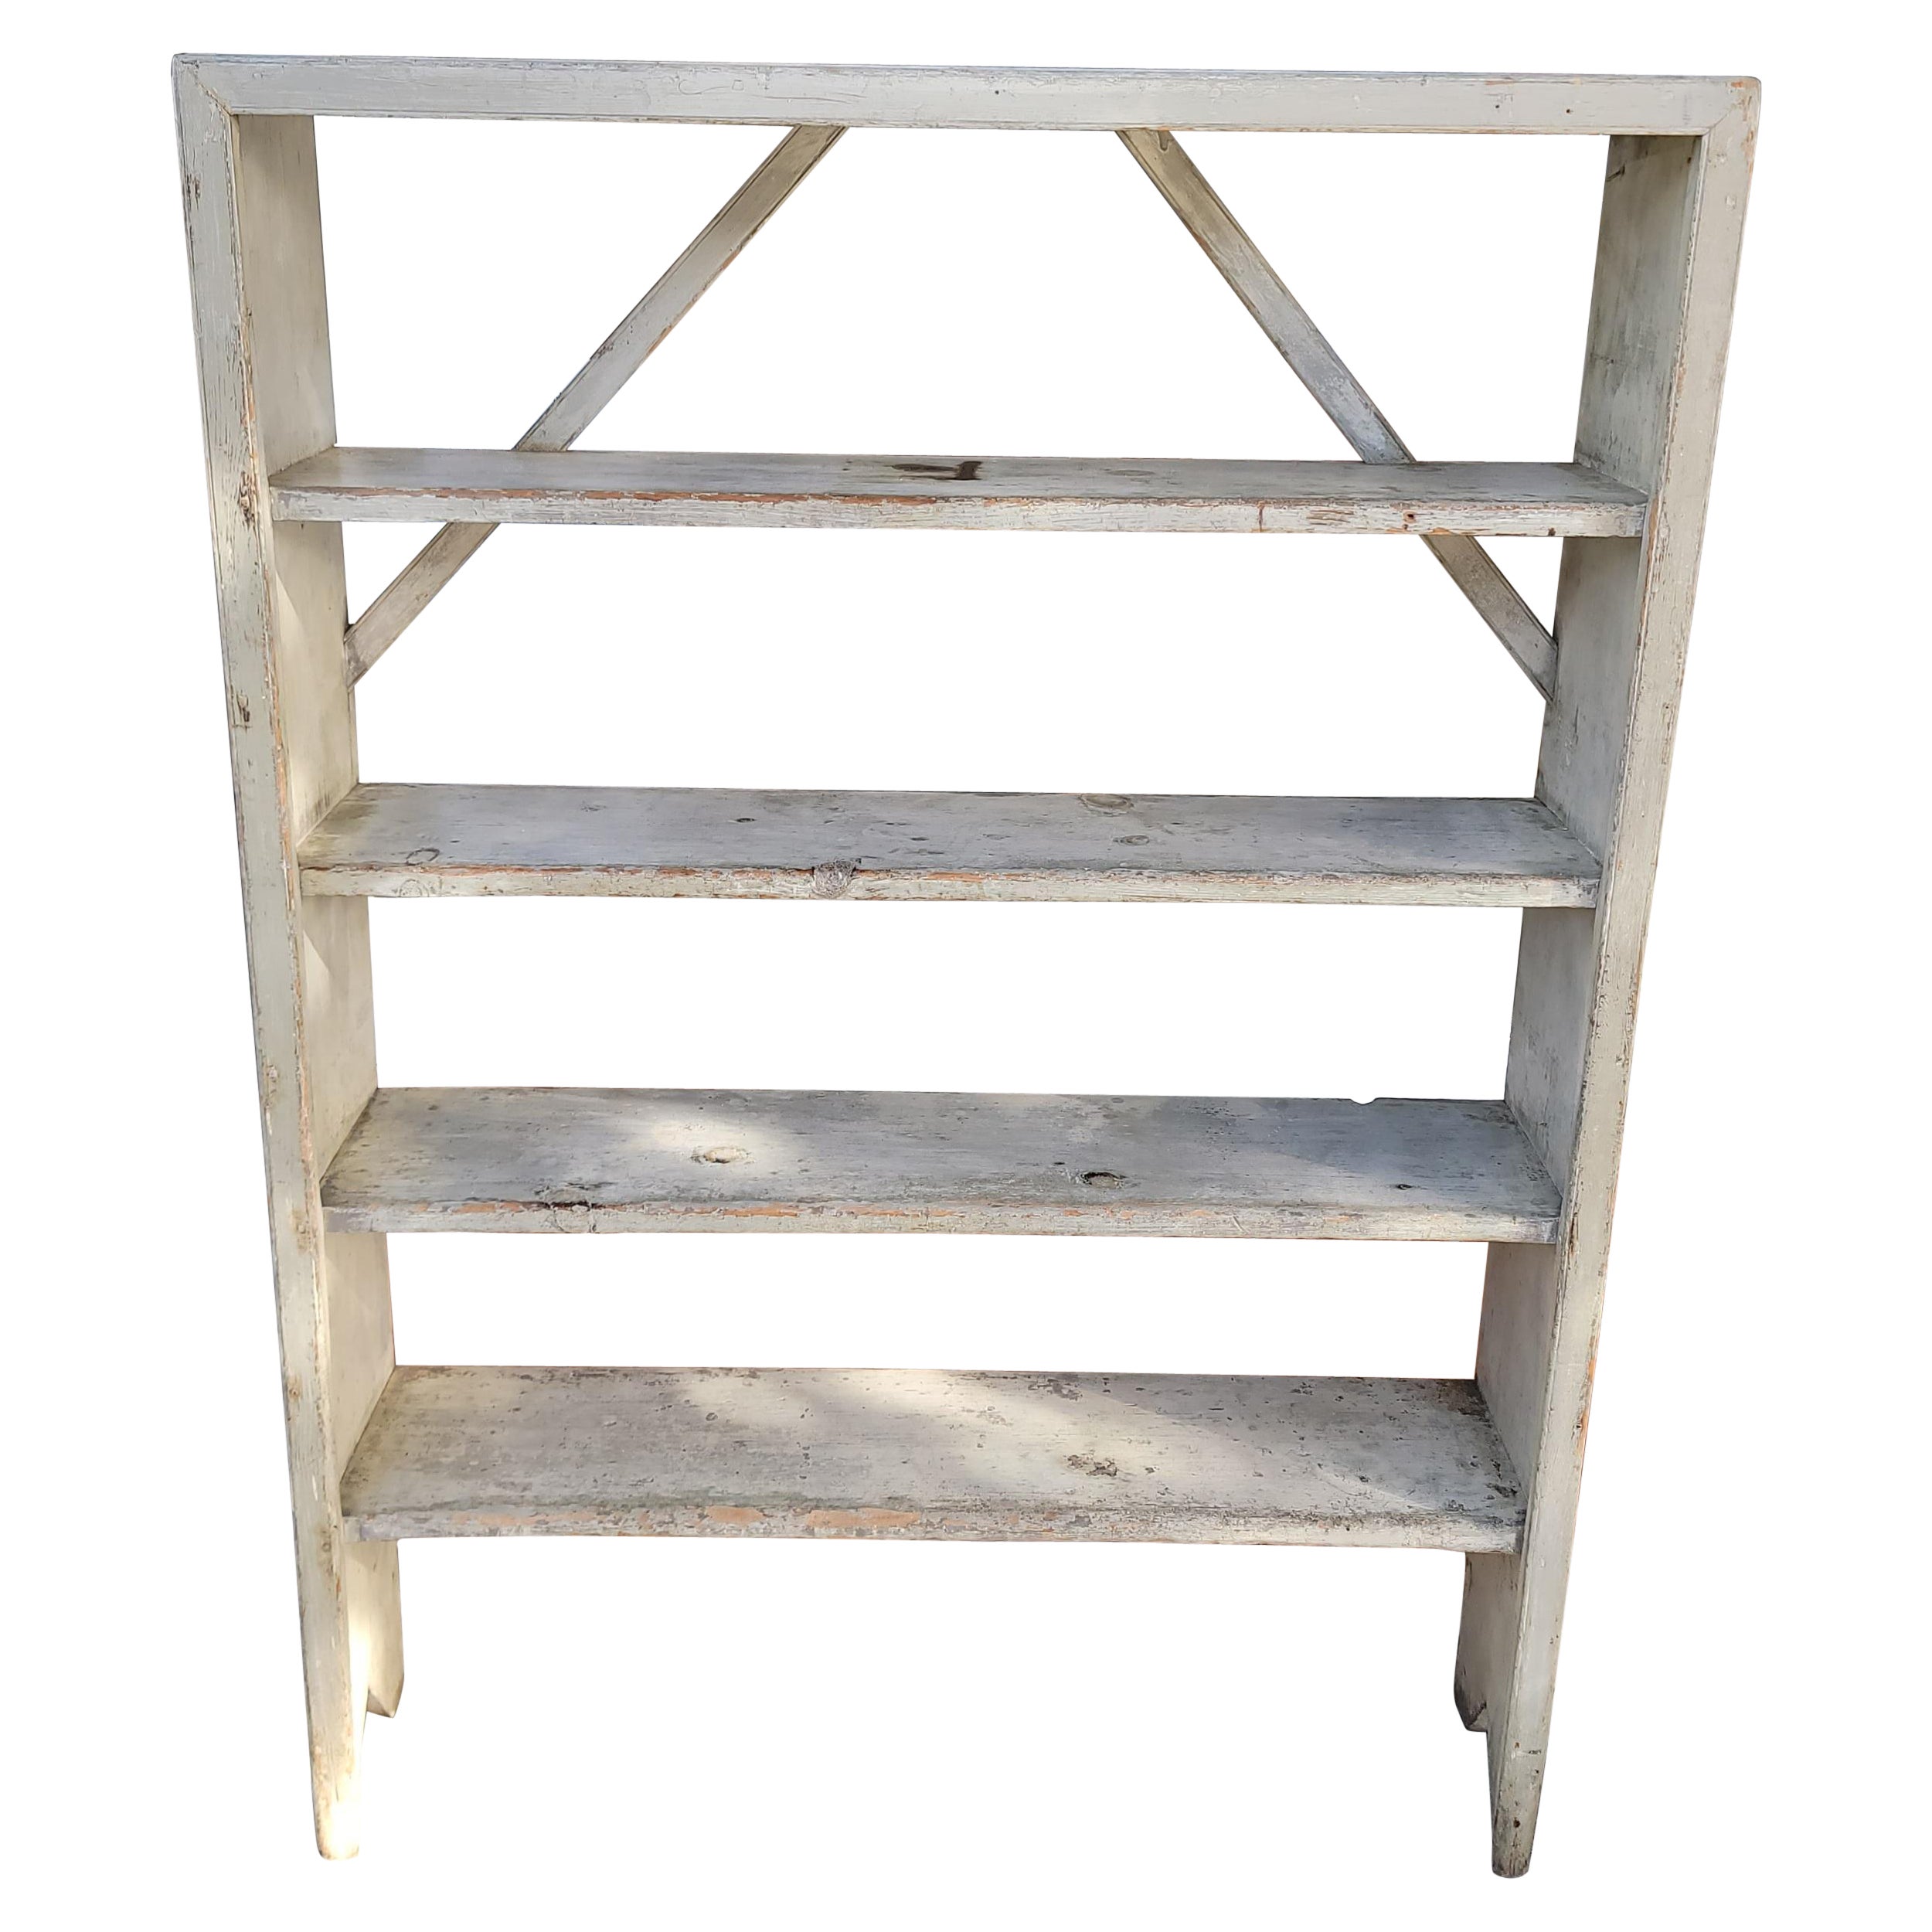 Early 19th C Original Grey Painted Shelf For Sale